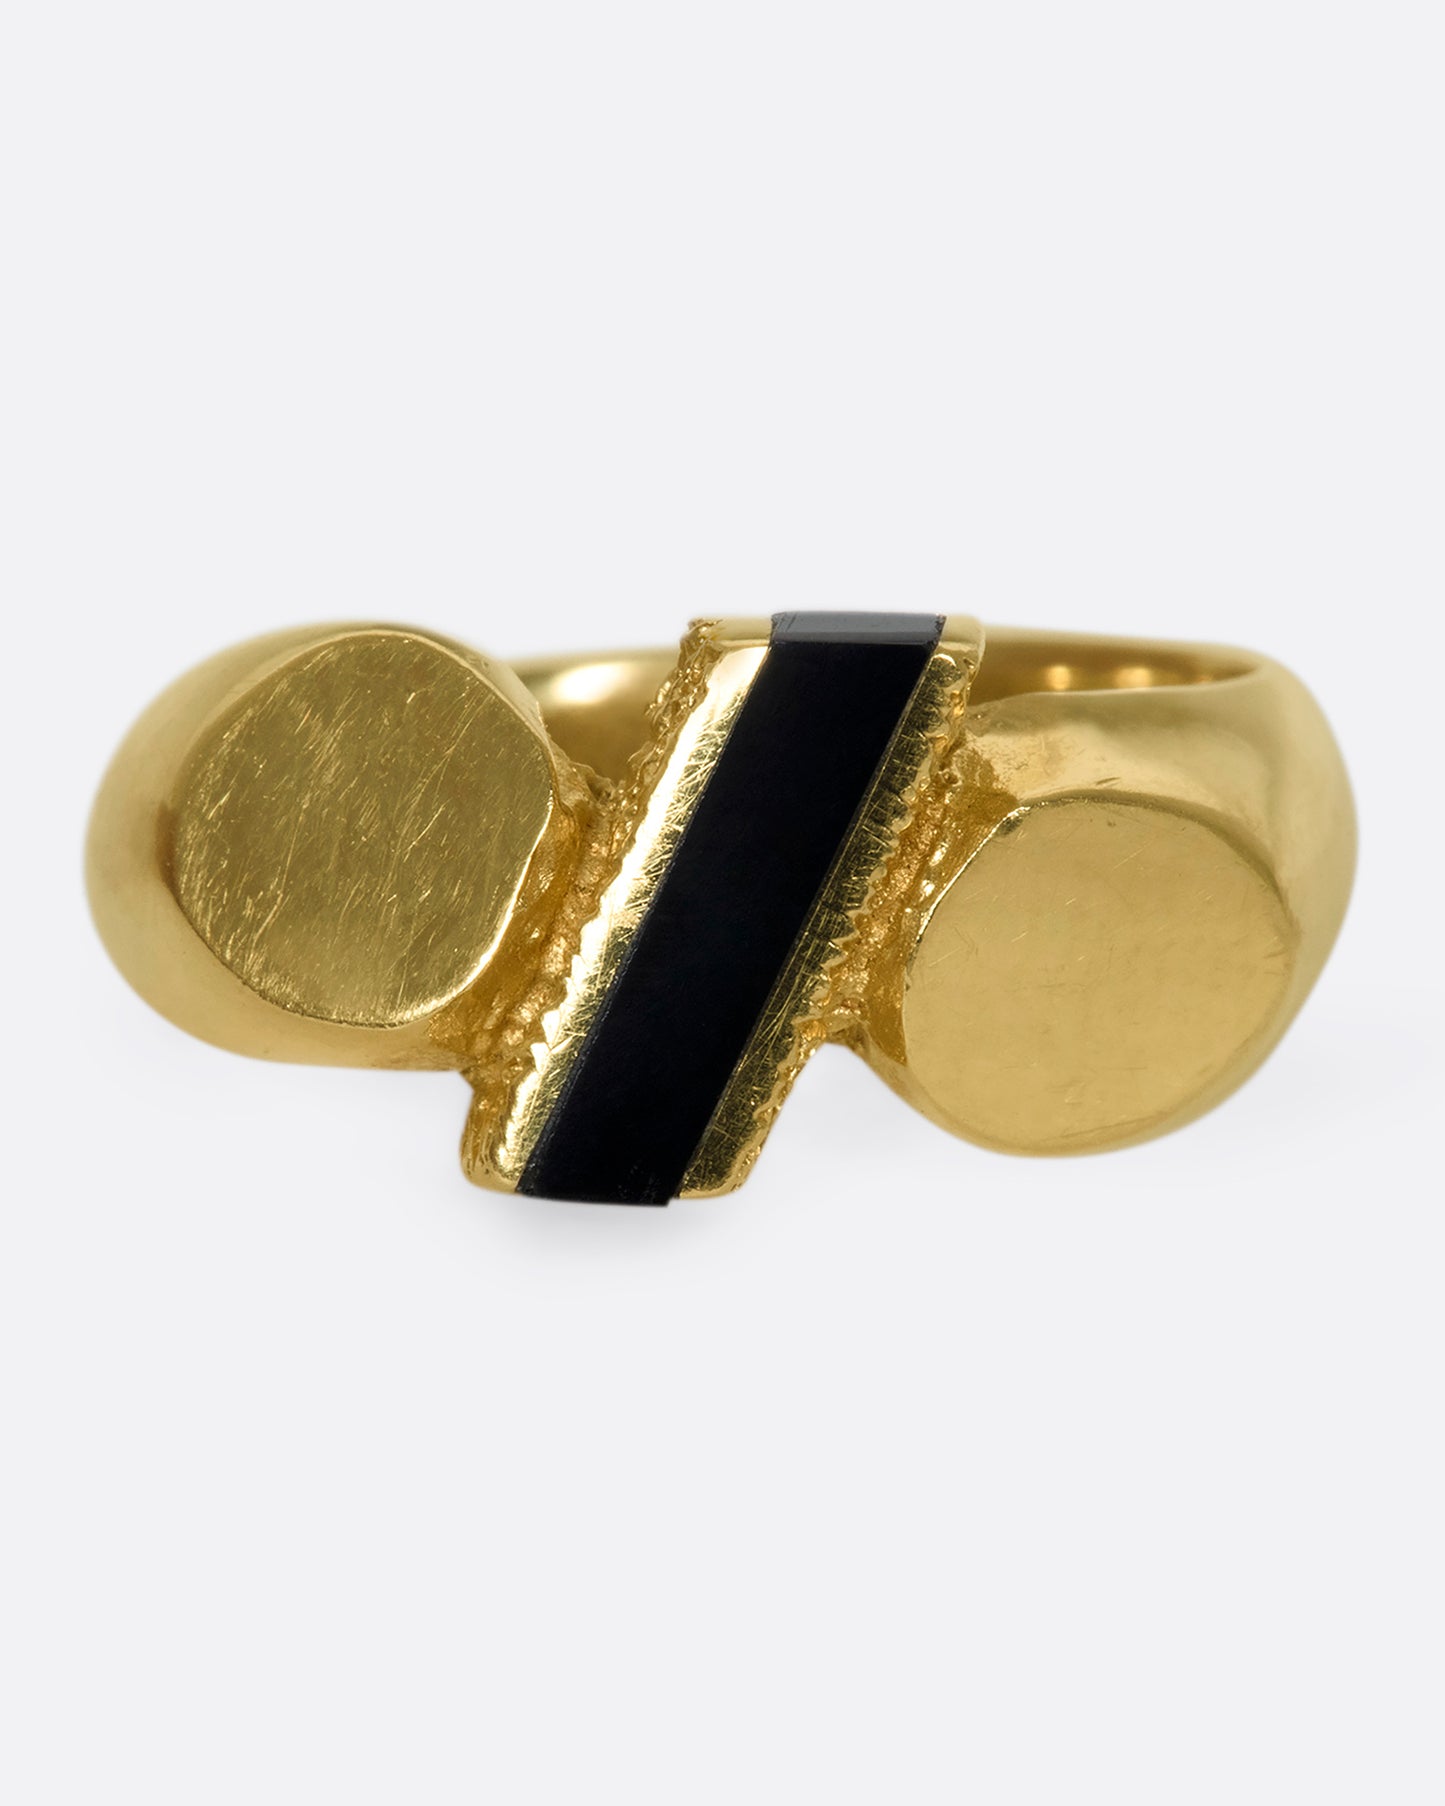 A vintage 14k gold puffy, rounded band with flat ends and a slice of onyx popping through the center